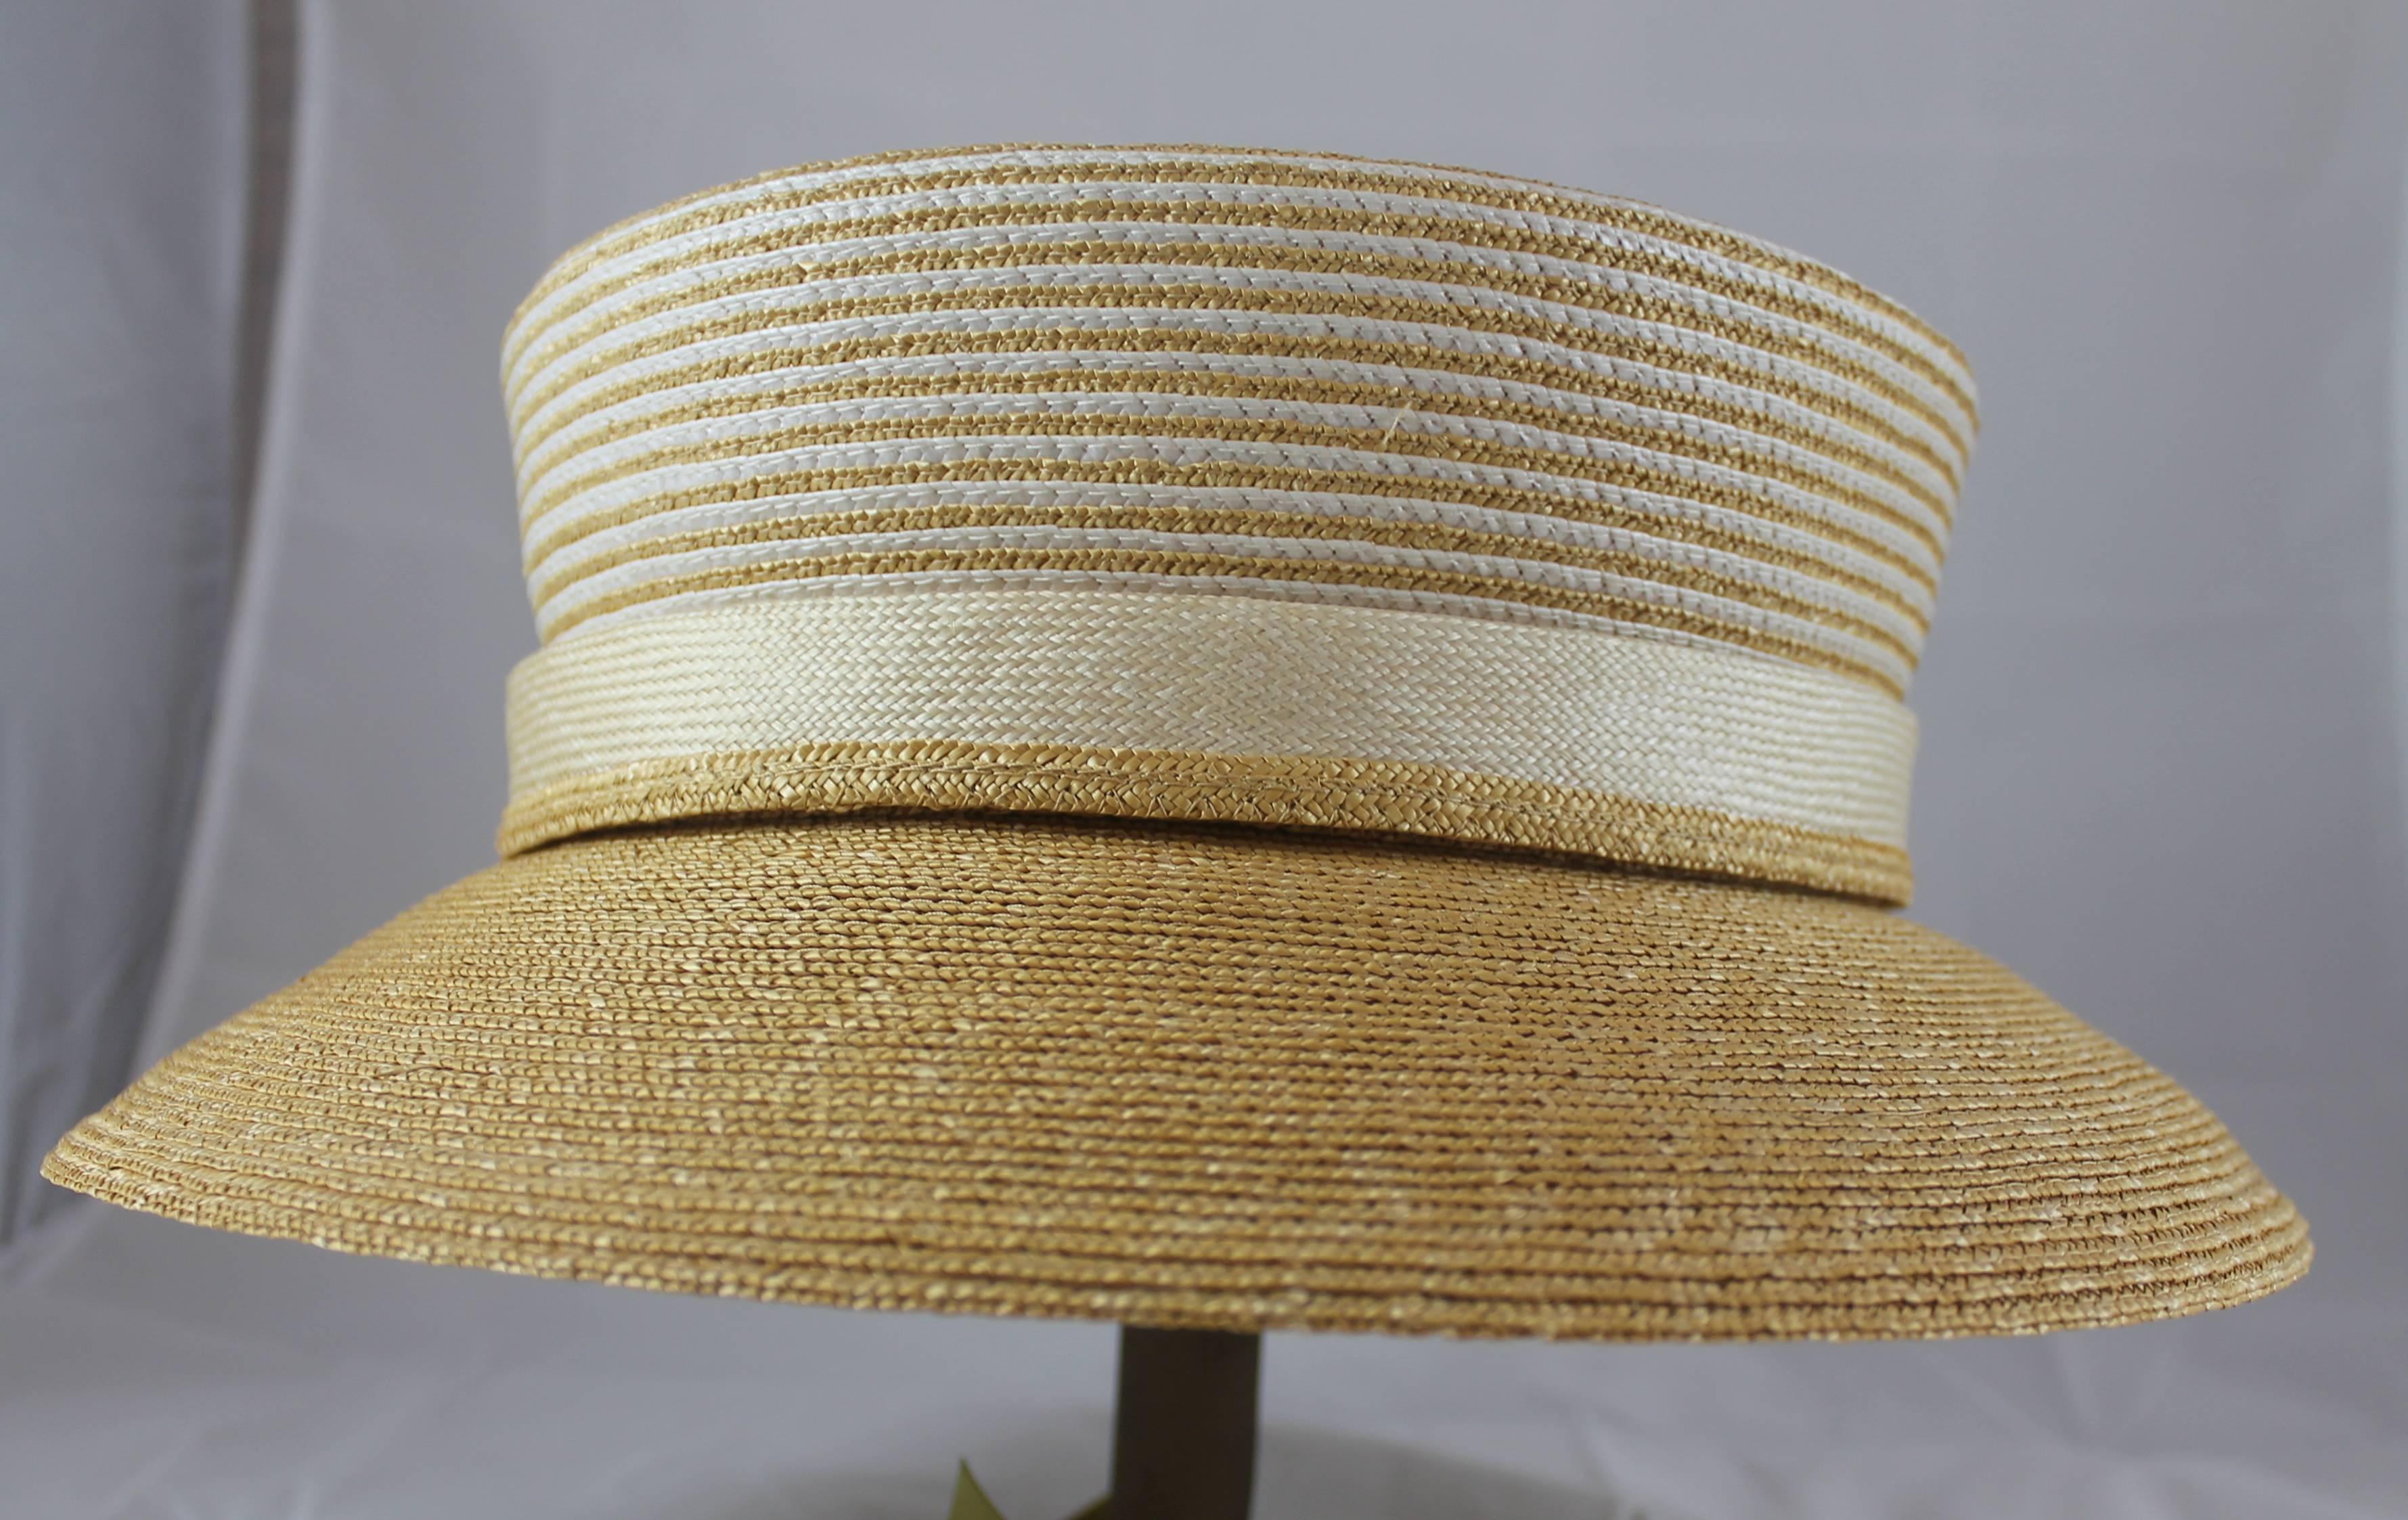 Suzanne Custom Millinery Tan Straw Hat with Thin Ivory Stripes. This hat is a straw hat with thin ivory stripes on the top. There is a down turned, tan, brim. It is in excellent condition with one small stain on the inside that is not